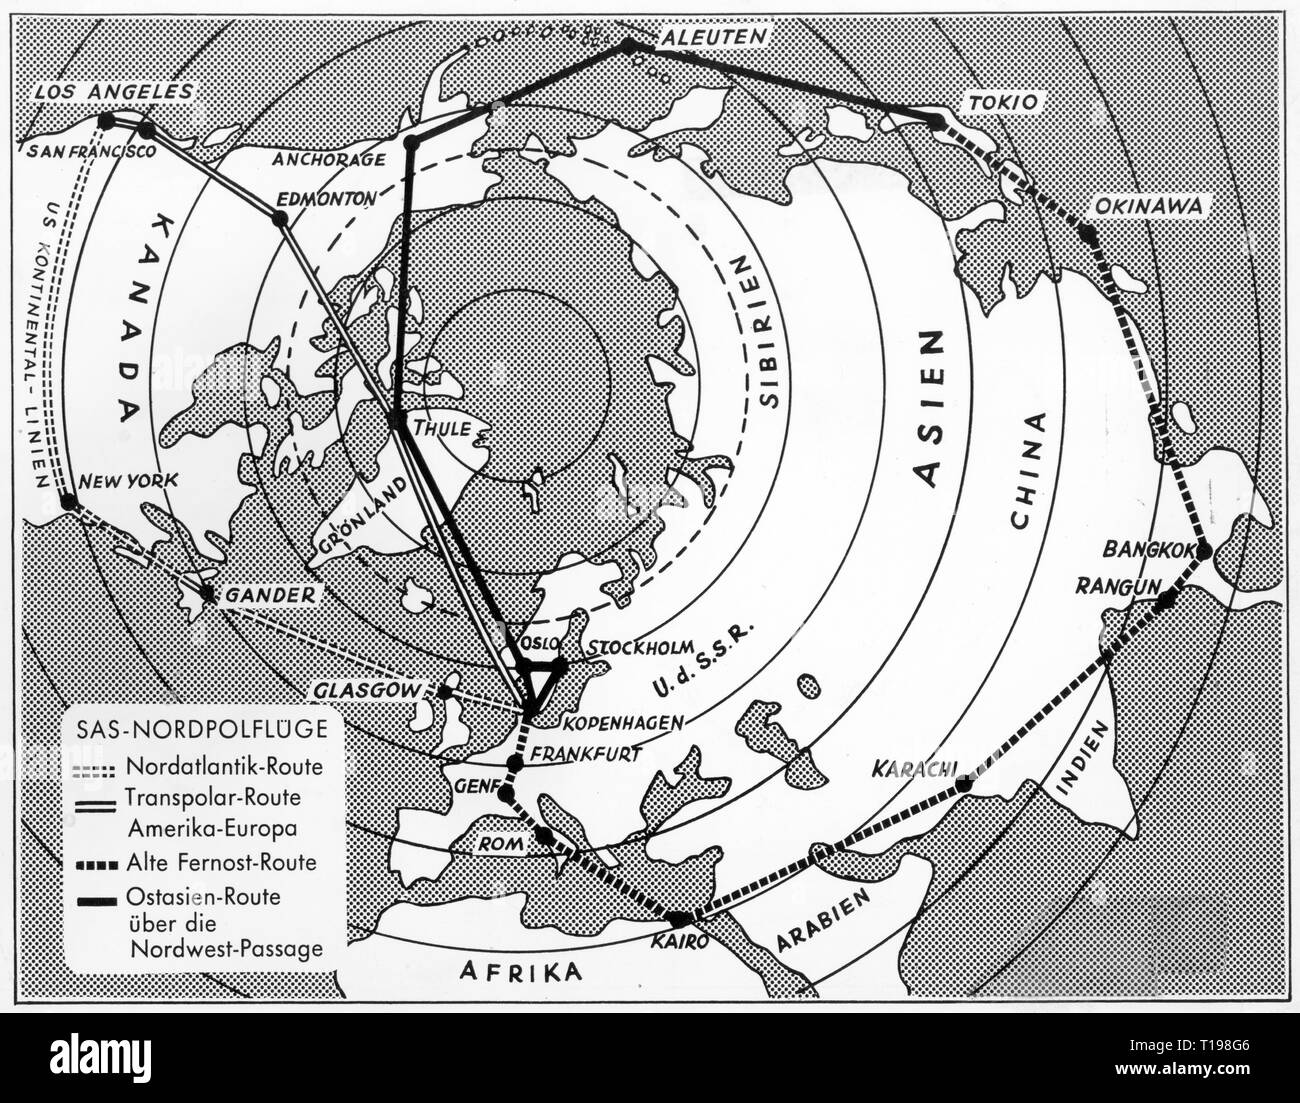 transport / transportation, aviation, airline, SAS Scandinavian Airlines, flight routes across the North Pole: Nordatlantik route, Transpolar route America - Europe, old Far East route, East Asia route across the Northwest Passage, map, 1950s, Additional-Rights-Clearance-Info-Not-Available Stock Photo